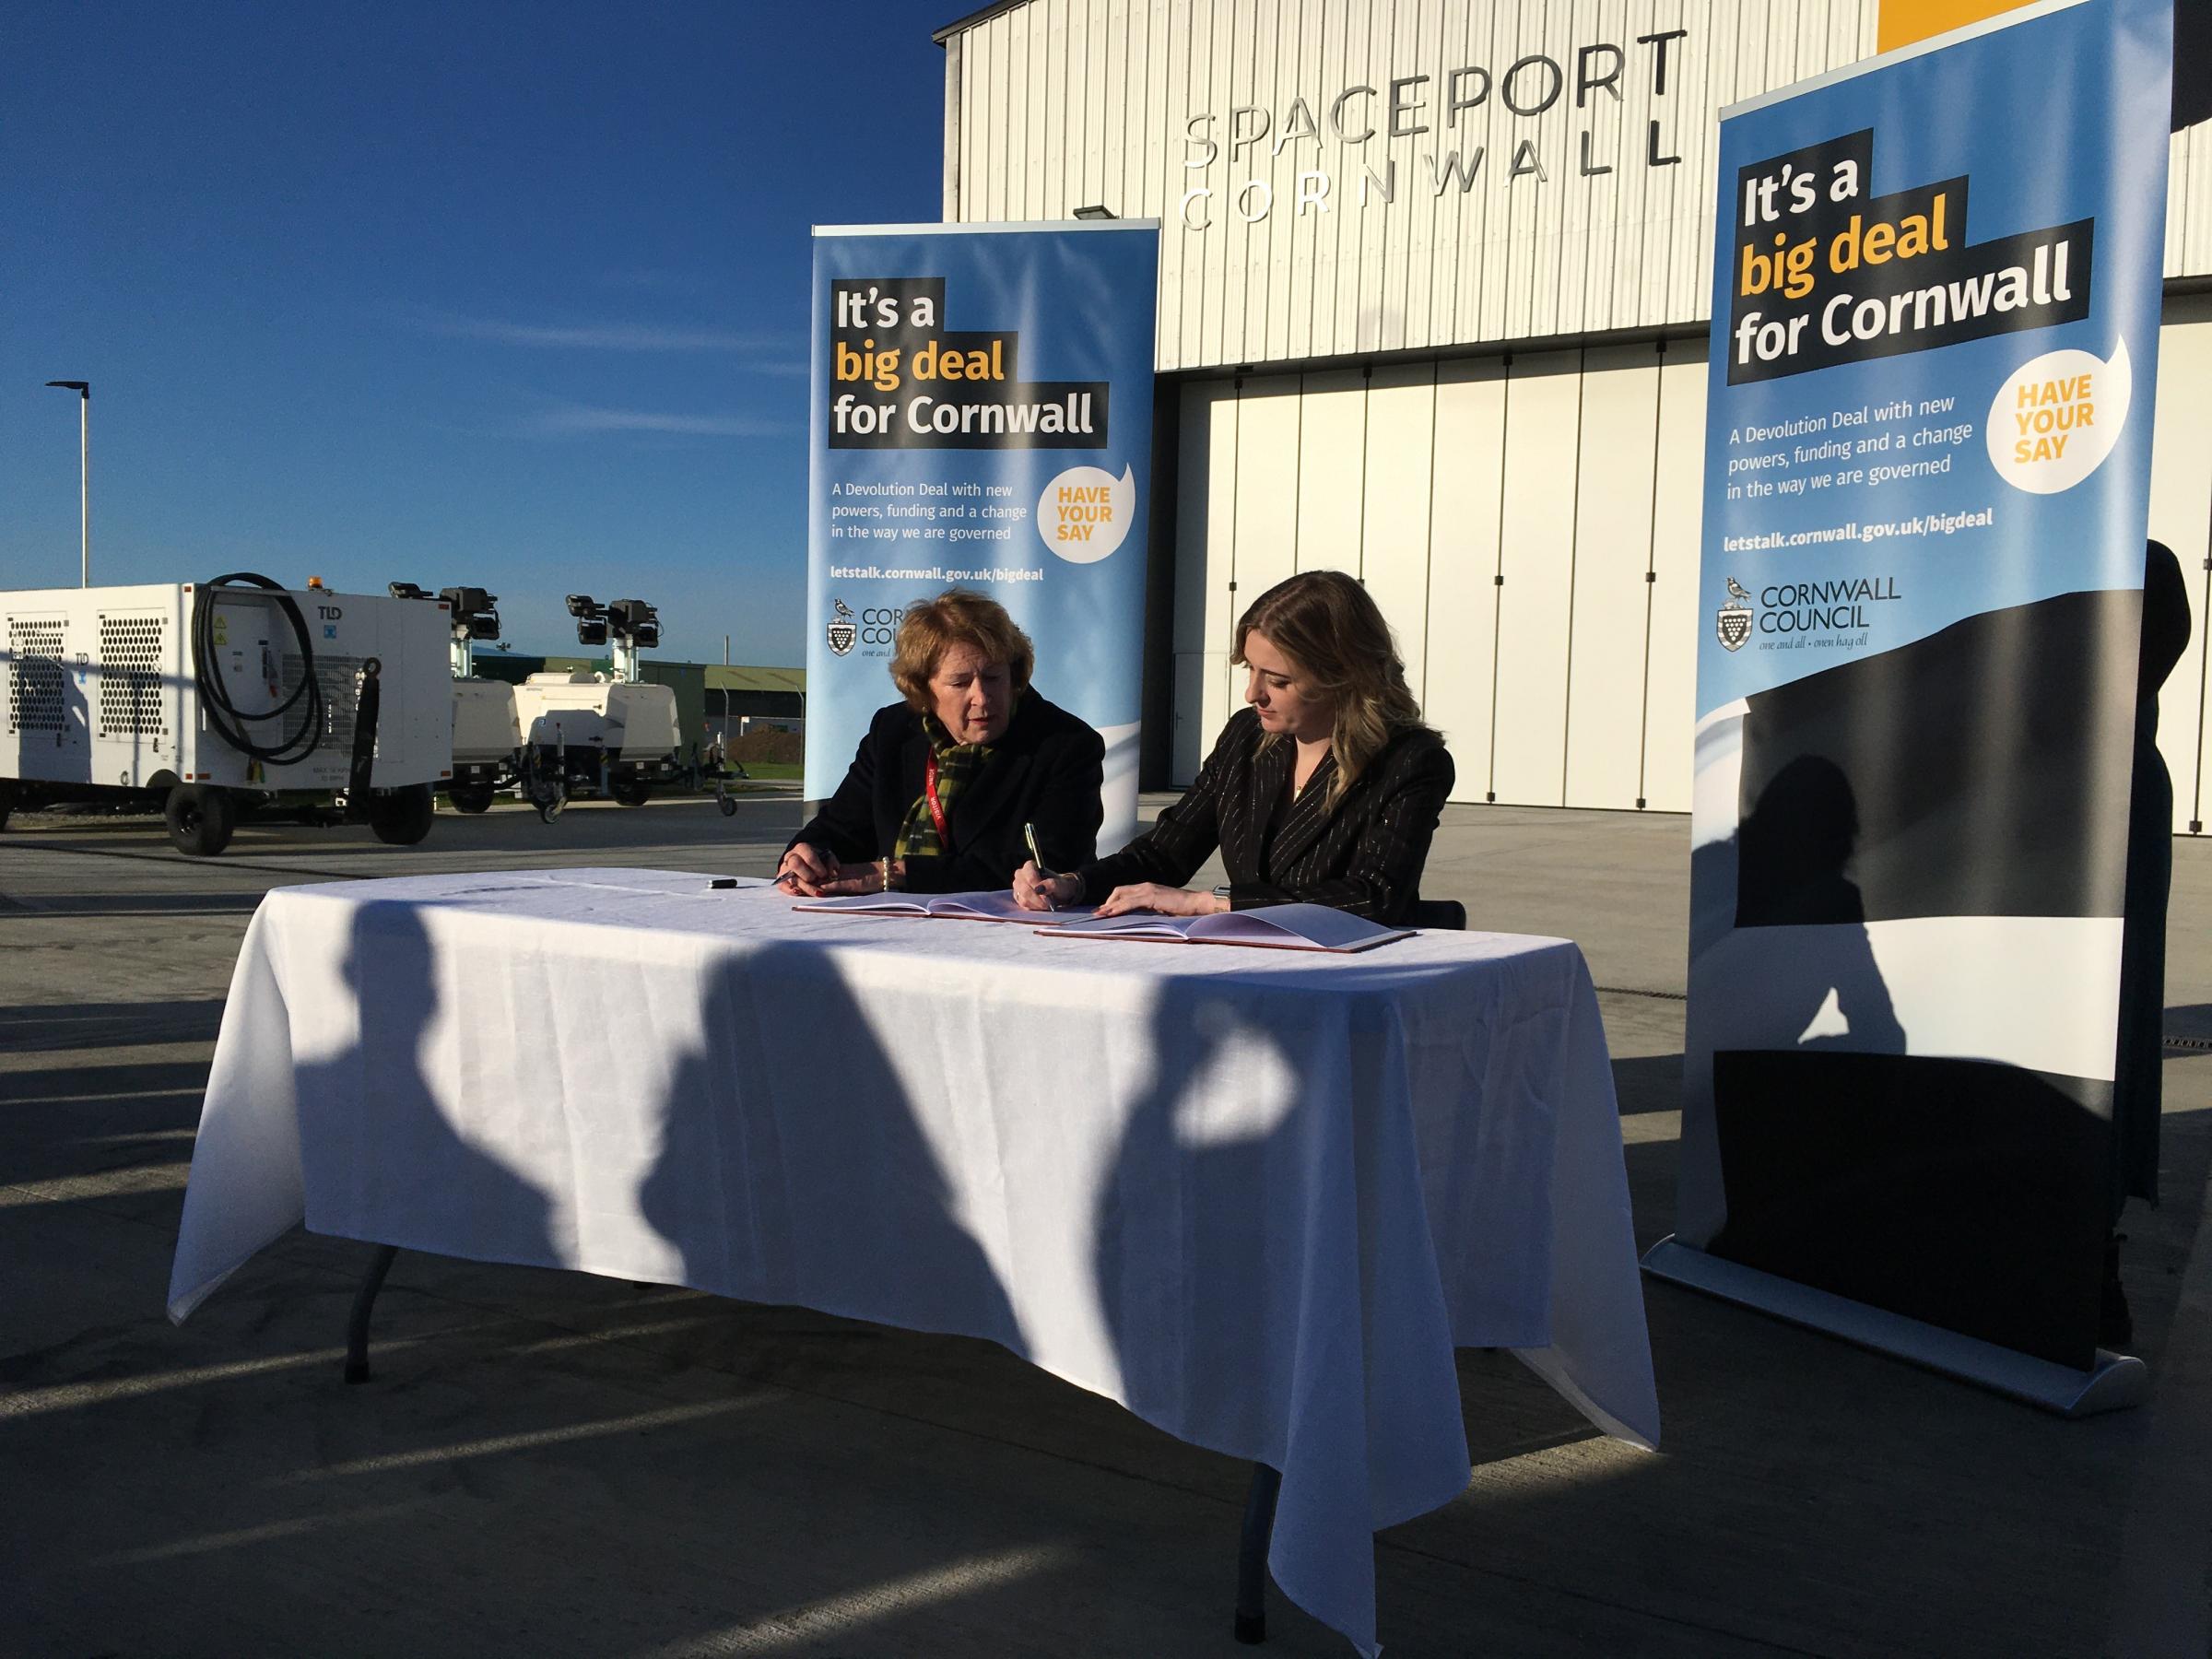 Cornwall Council leader Linda Taylor and Levelling Up minister Dehanna Davison sign the Cornwall Devolution deal at Spaceport Cornwall (Image: Richard Whitehouse/LDRS)